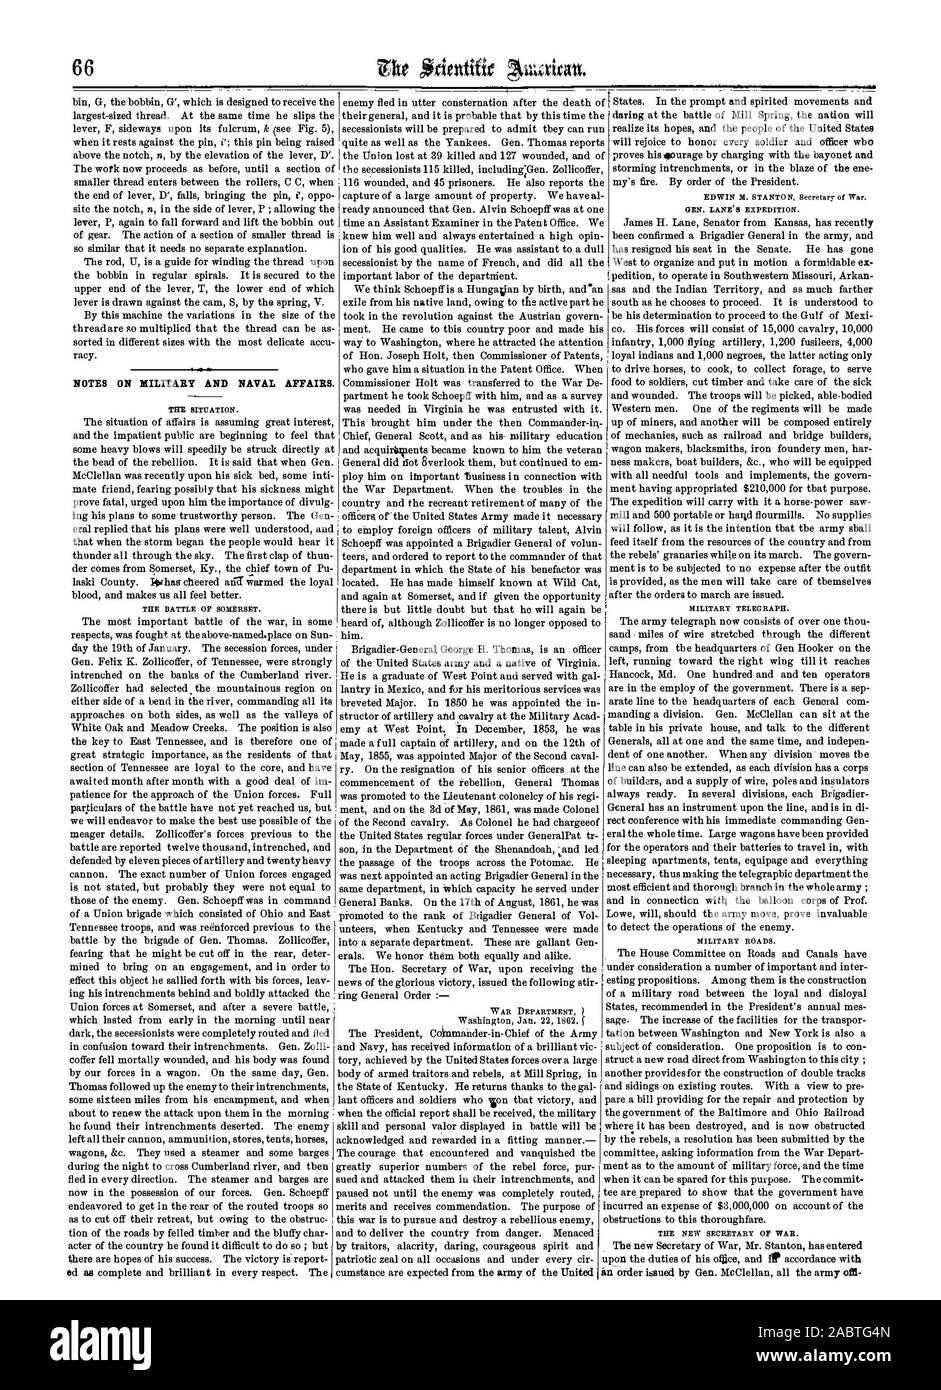 NOTES ON MILITARY AND NAVAL AFFAIRS., scientific american, 1862-02-01 Stock Photo